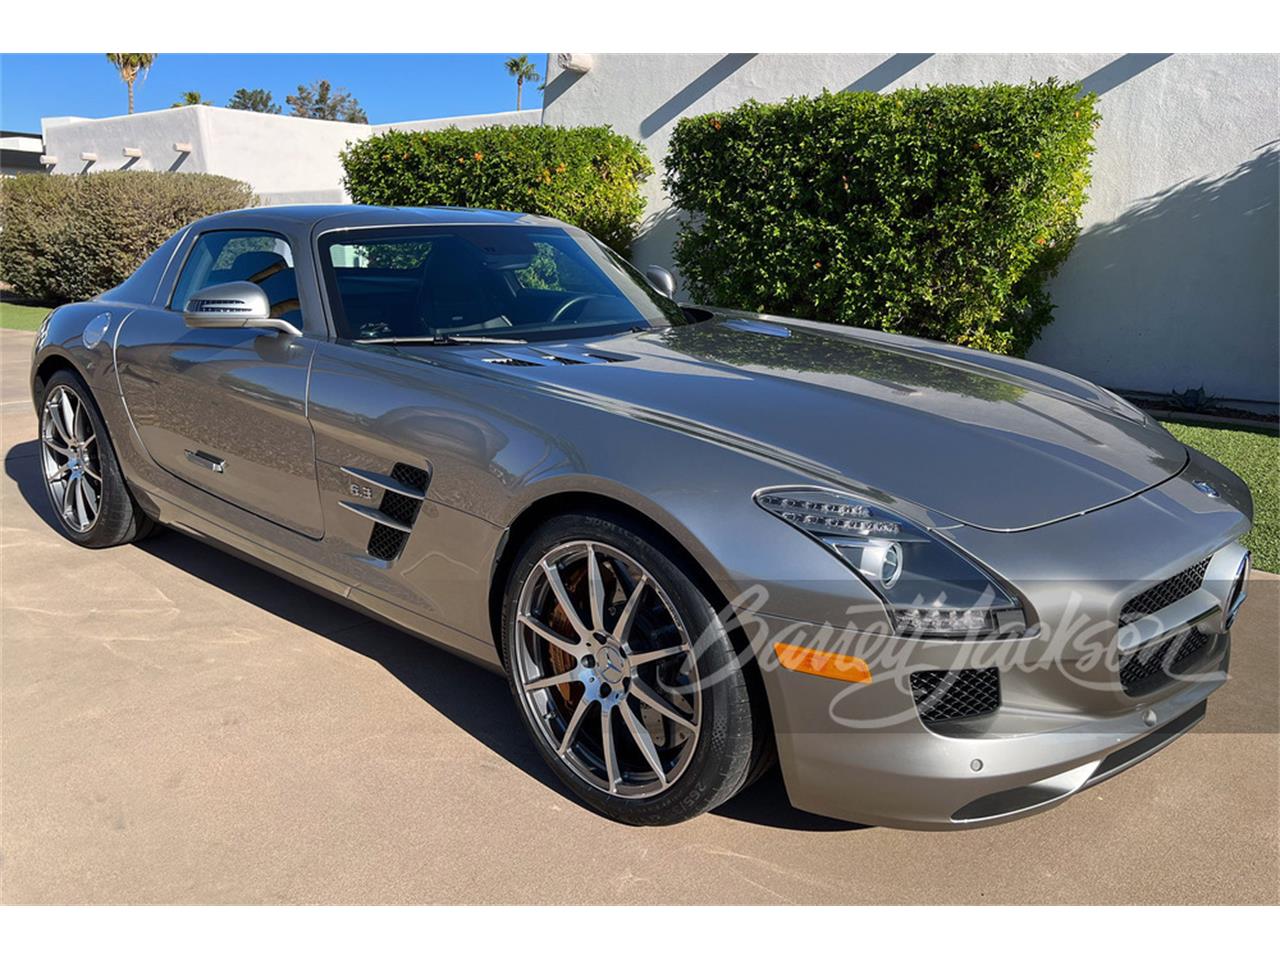 For Sale at Auction: 2011 Mercedes-Benz SLS AMG in Scottsdale, Arizona for sale in Scottsdale, AZ